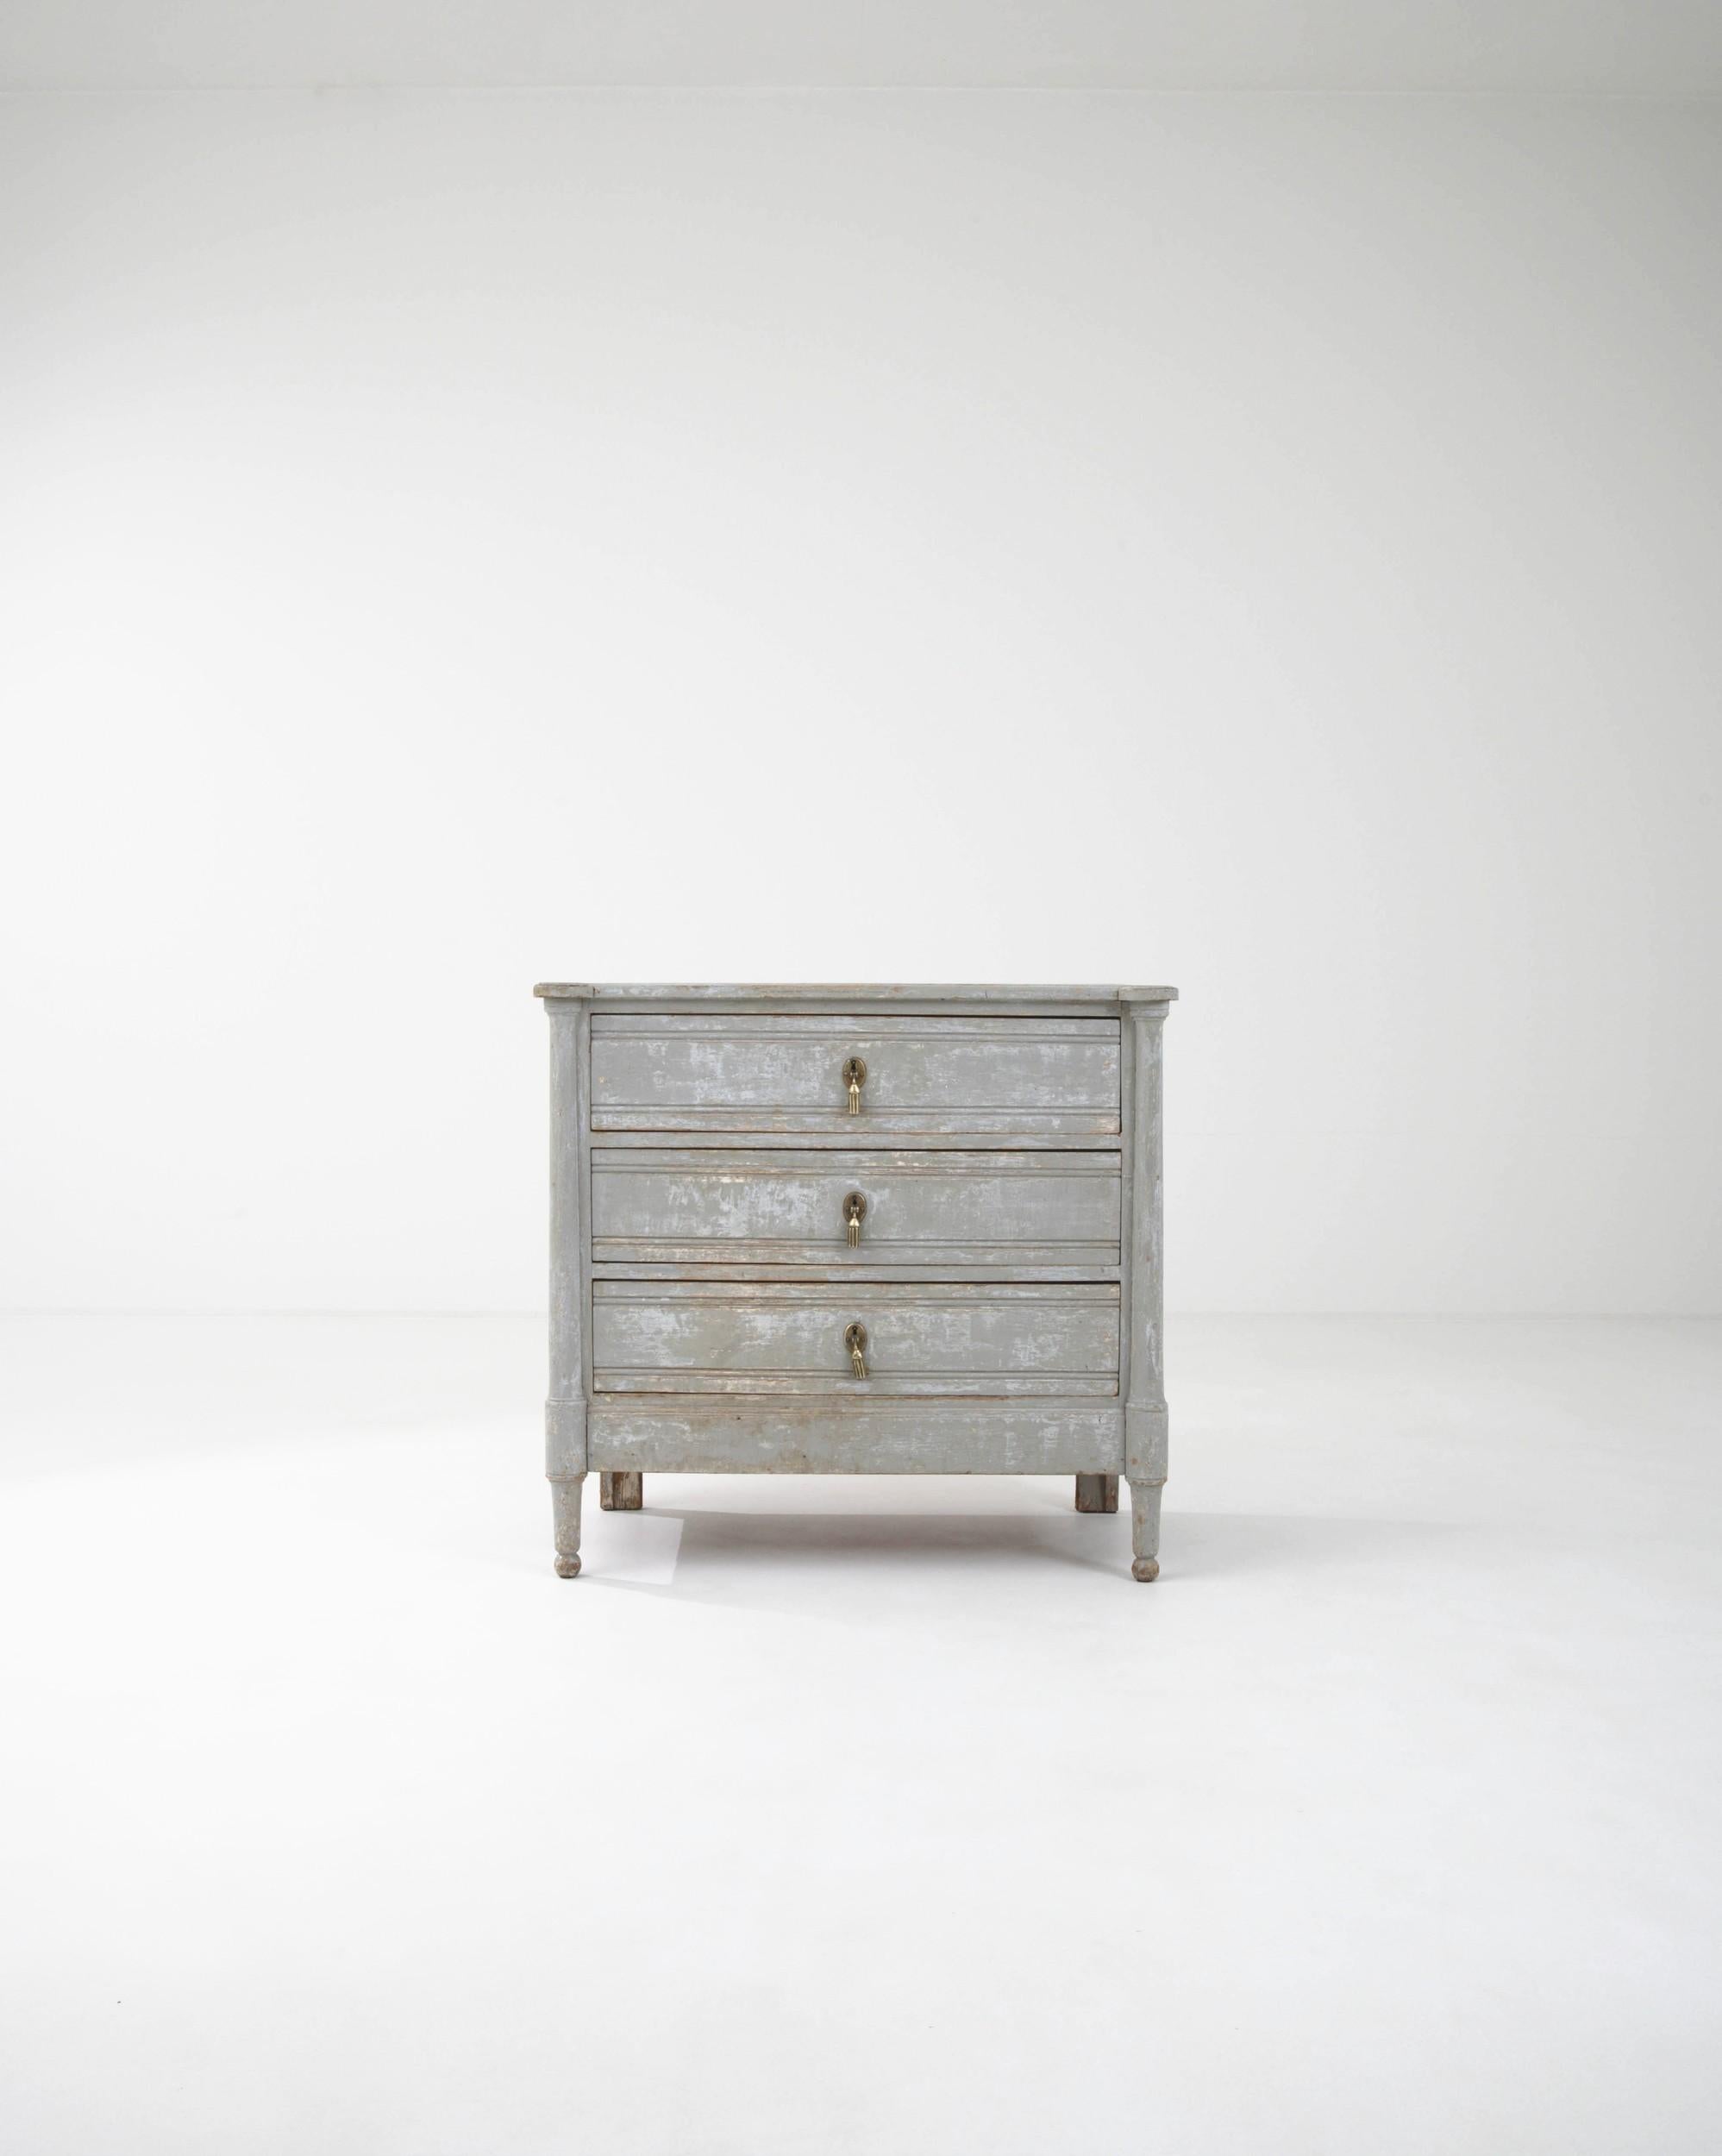 This antique wooden chest of drawers epitomizes the refinement of Neoclassical style. Hand-built in France in the 1800s, the graceful simplicity of the design is accentuated by the dove-grey patina of the painted finish, weathered over the centuries